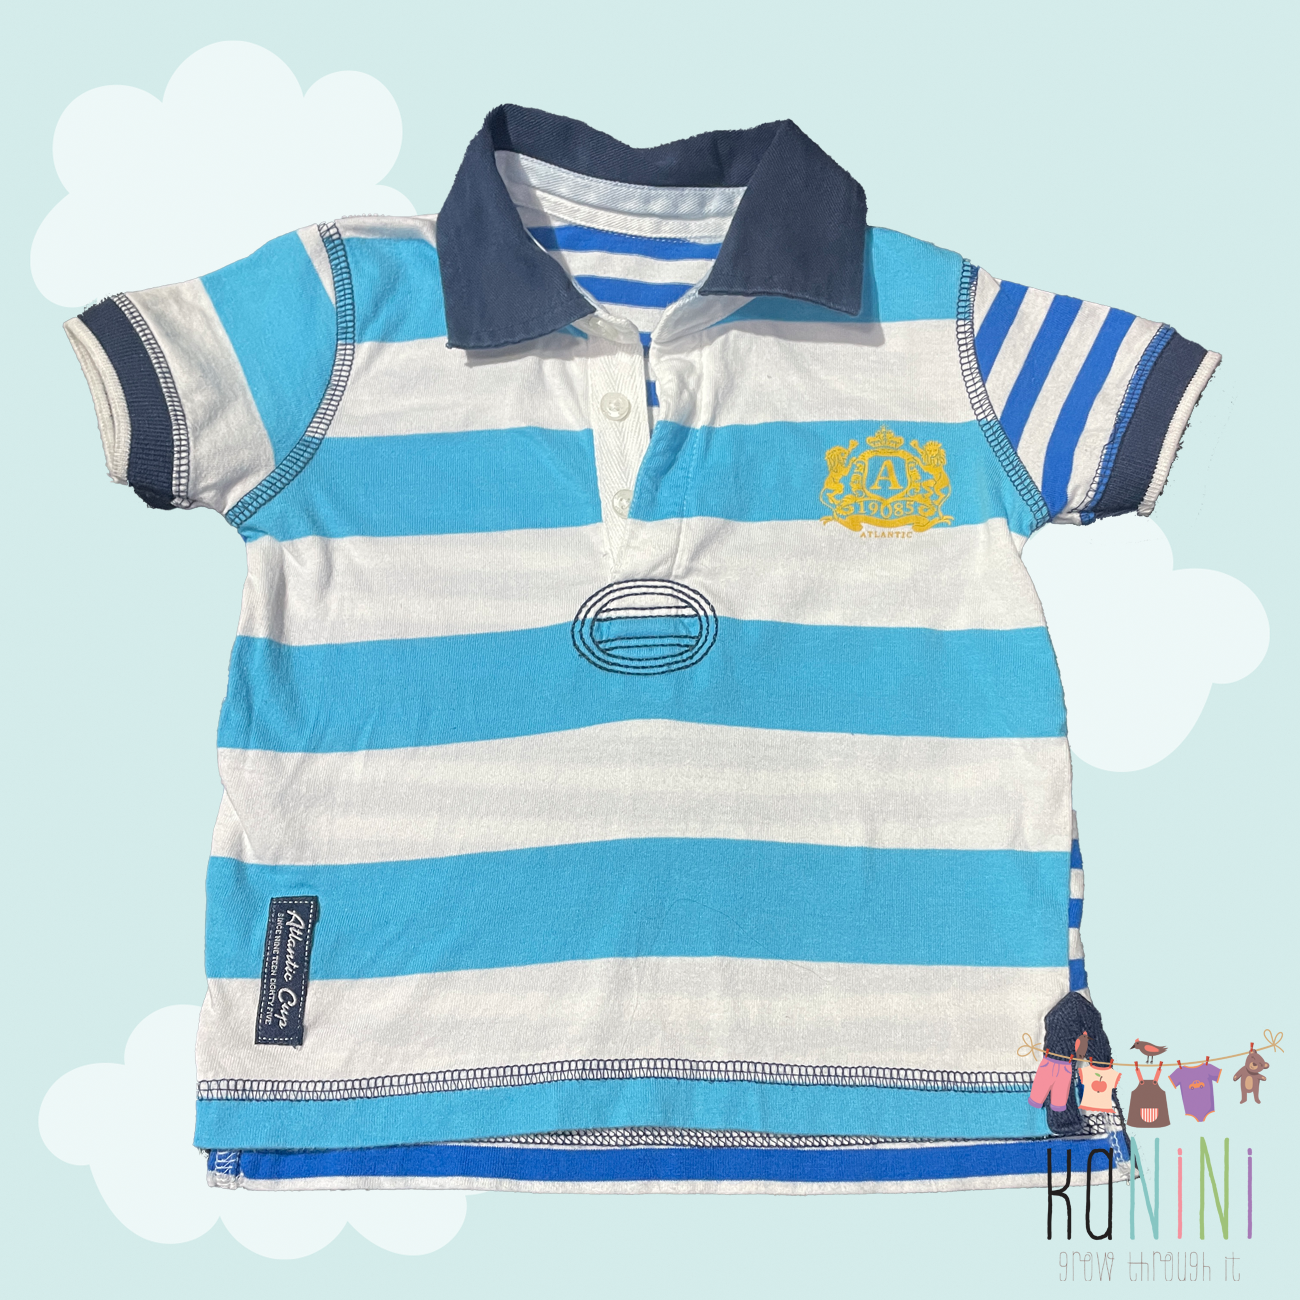 Featured image for “Woolworths 12 - 18 Months Boys Striped Shirt”